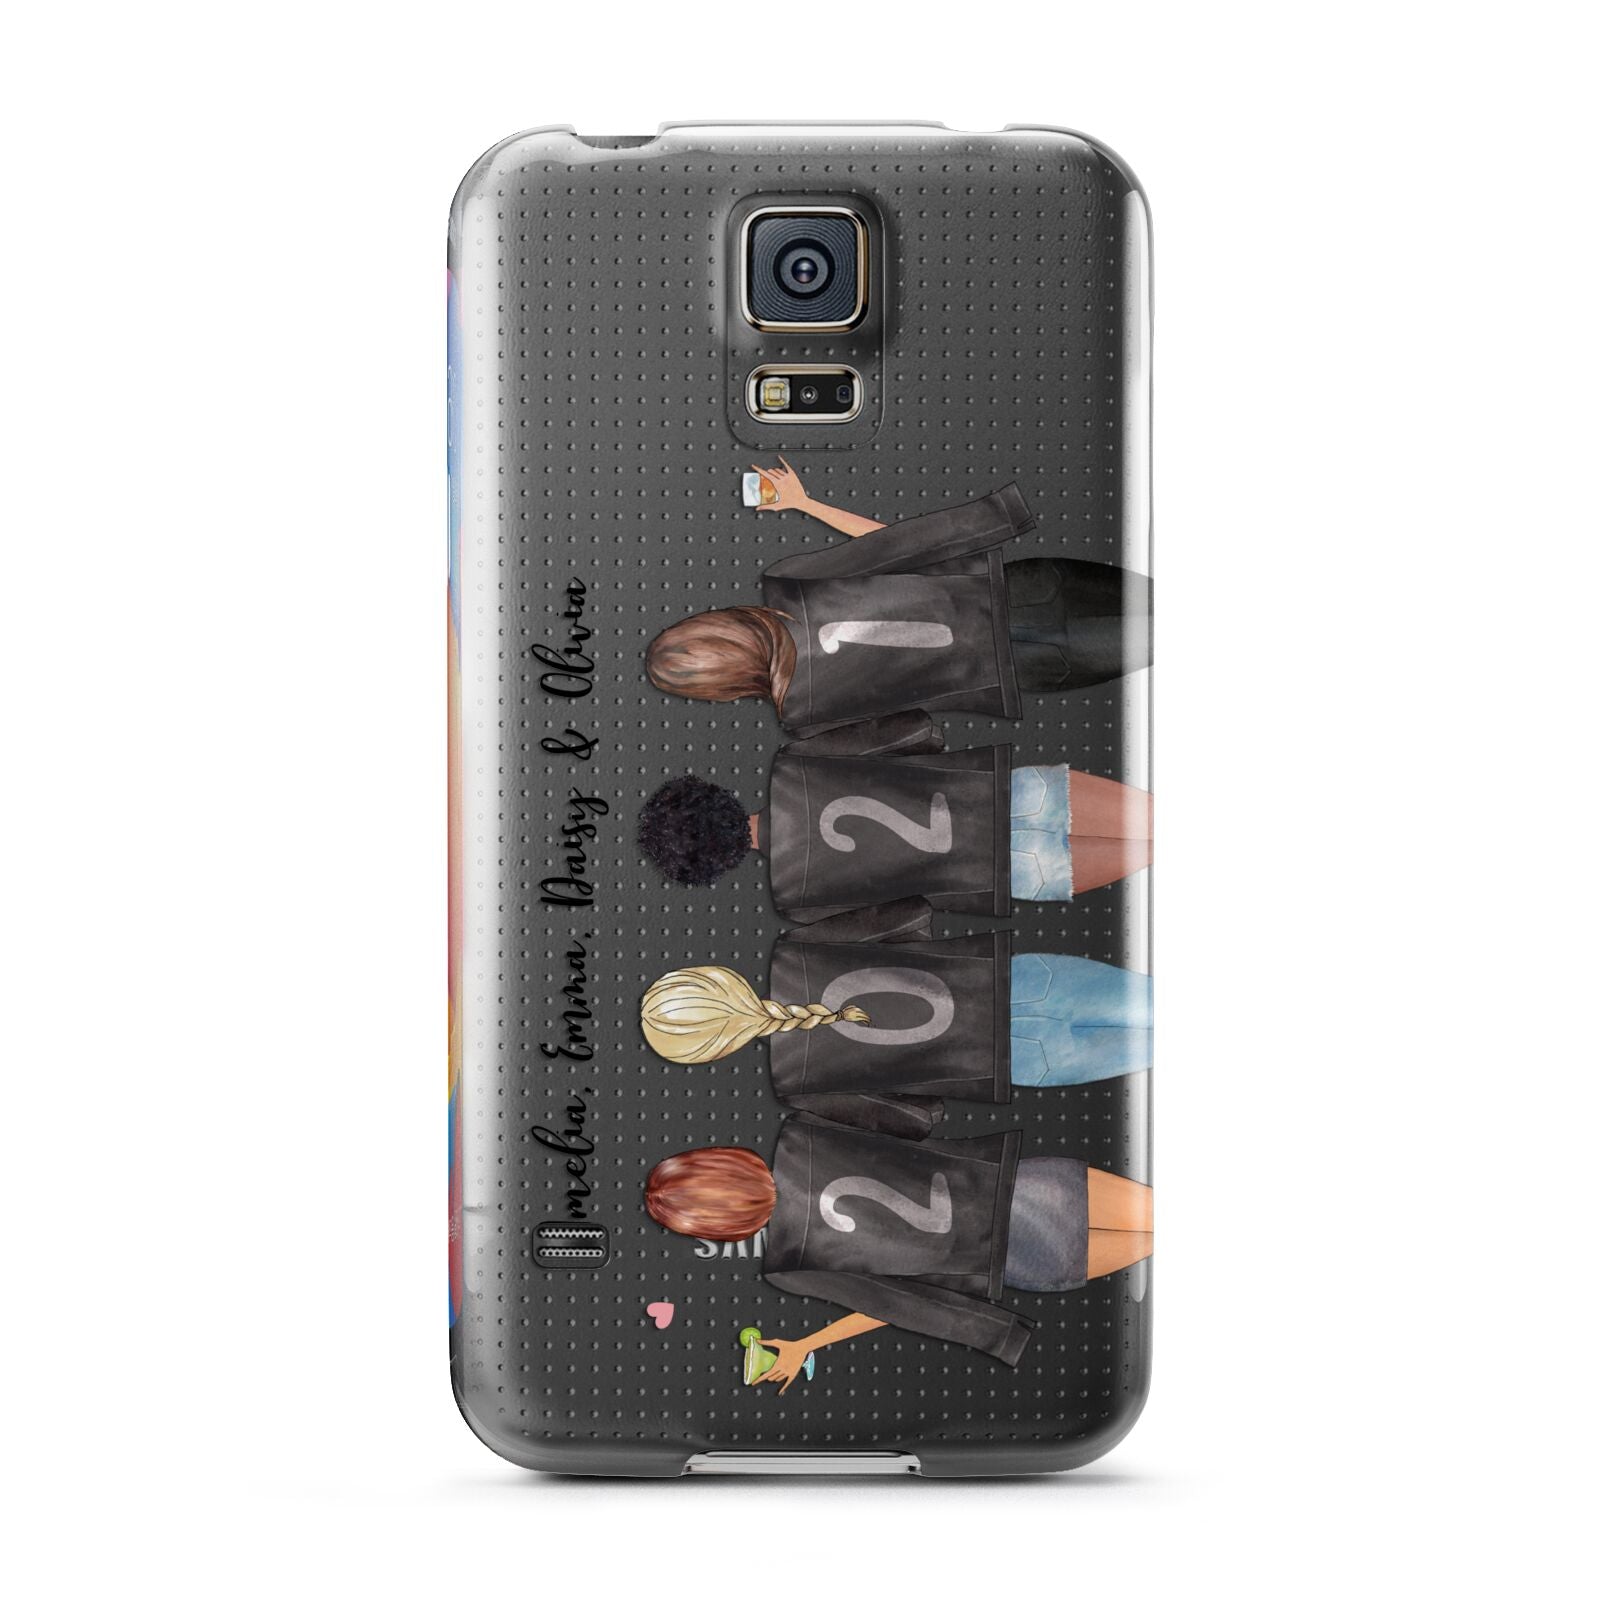 4 Best Friends with Names Samsung Galaxy S5 Case